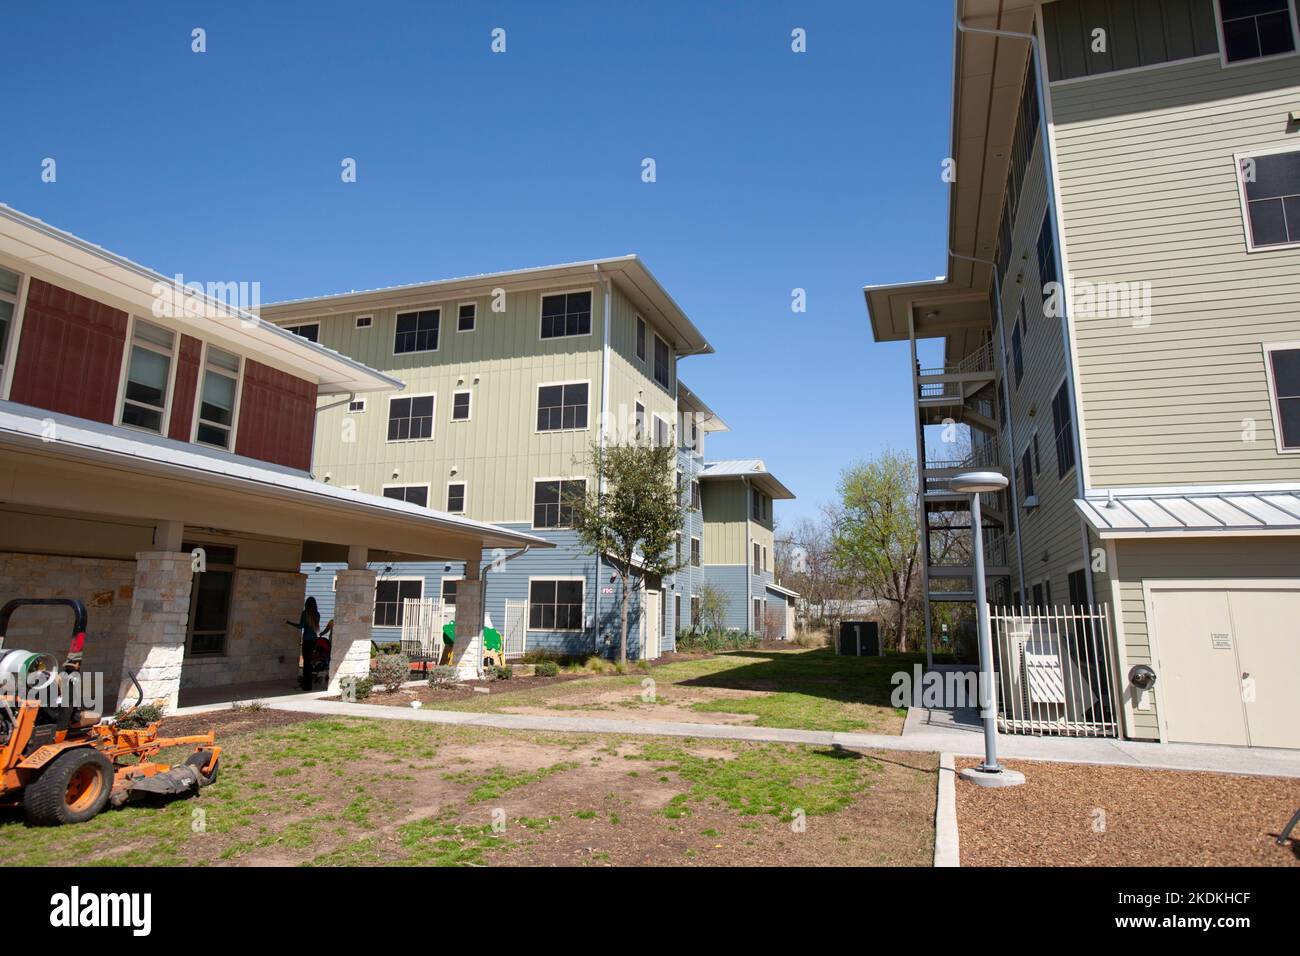 Accomodation for illegal migrants in North Texas Stock Photo